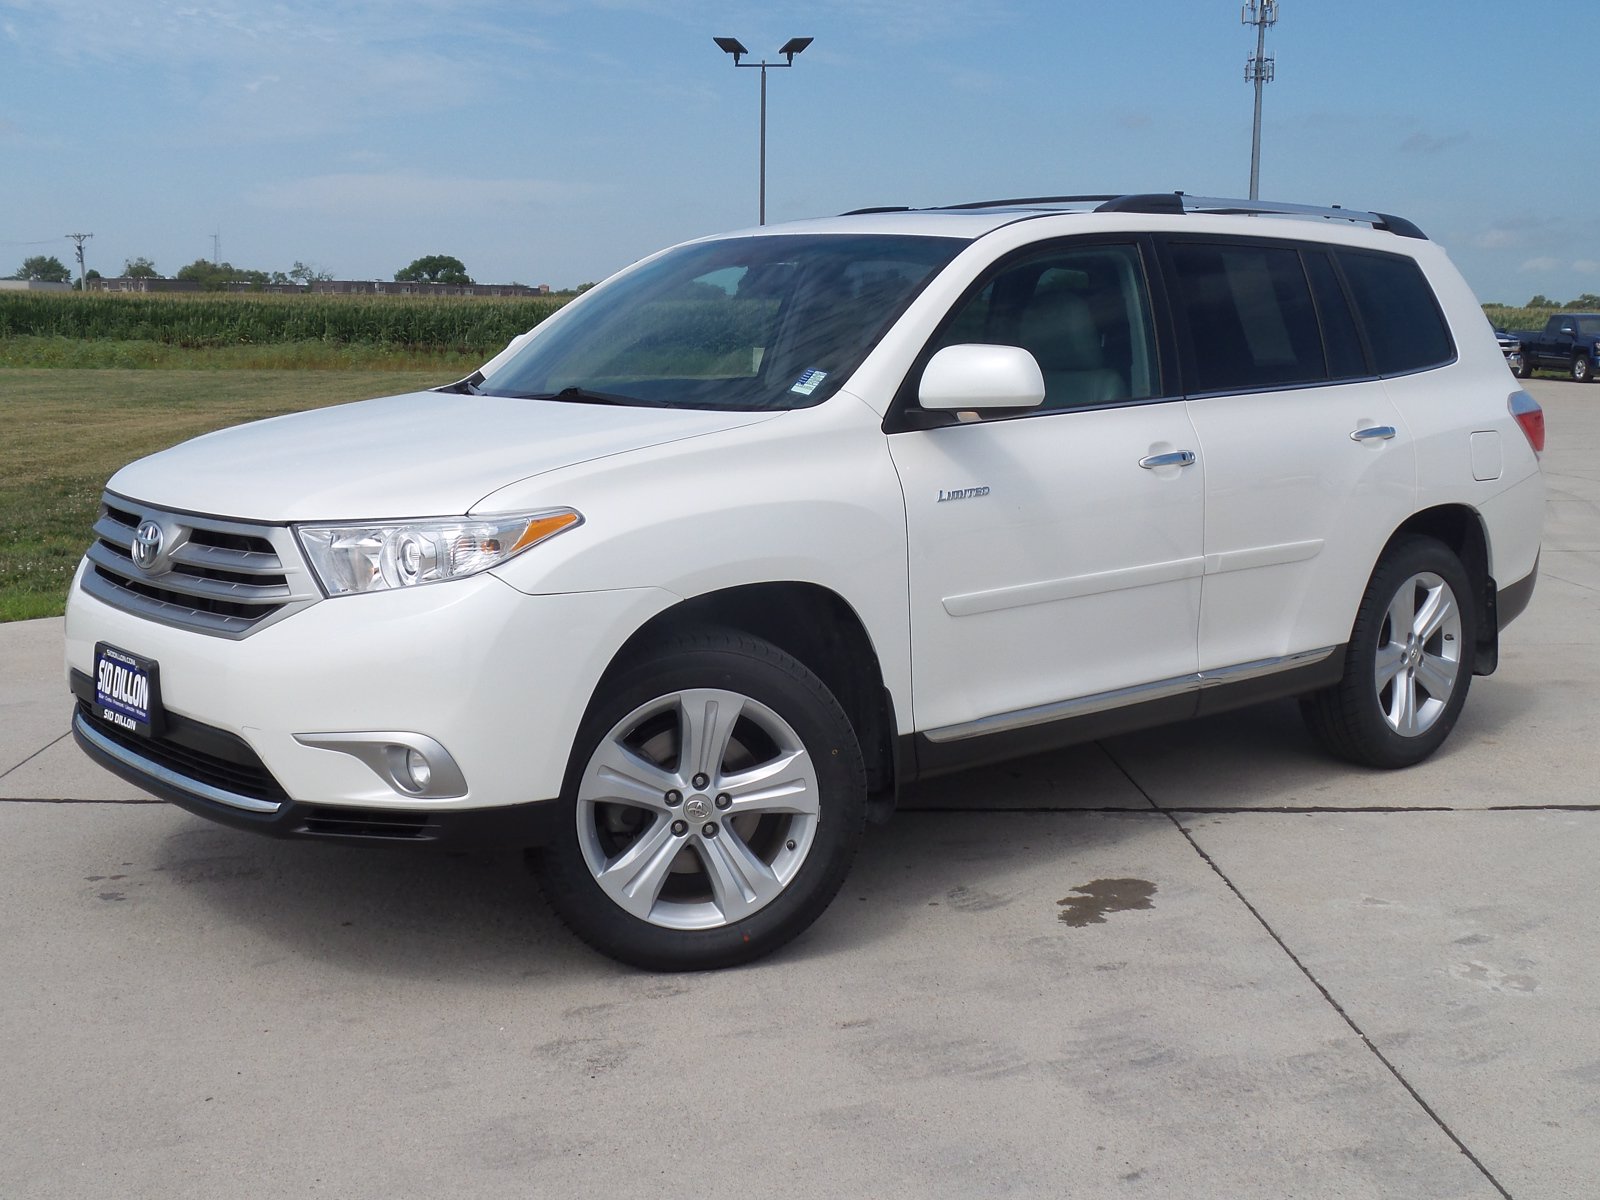 Pre-Owned 2012 Toyota Highlander Limited FWD SUV